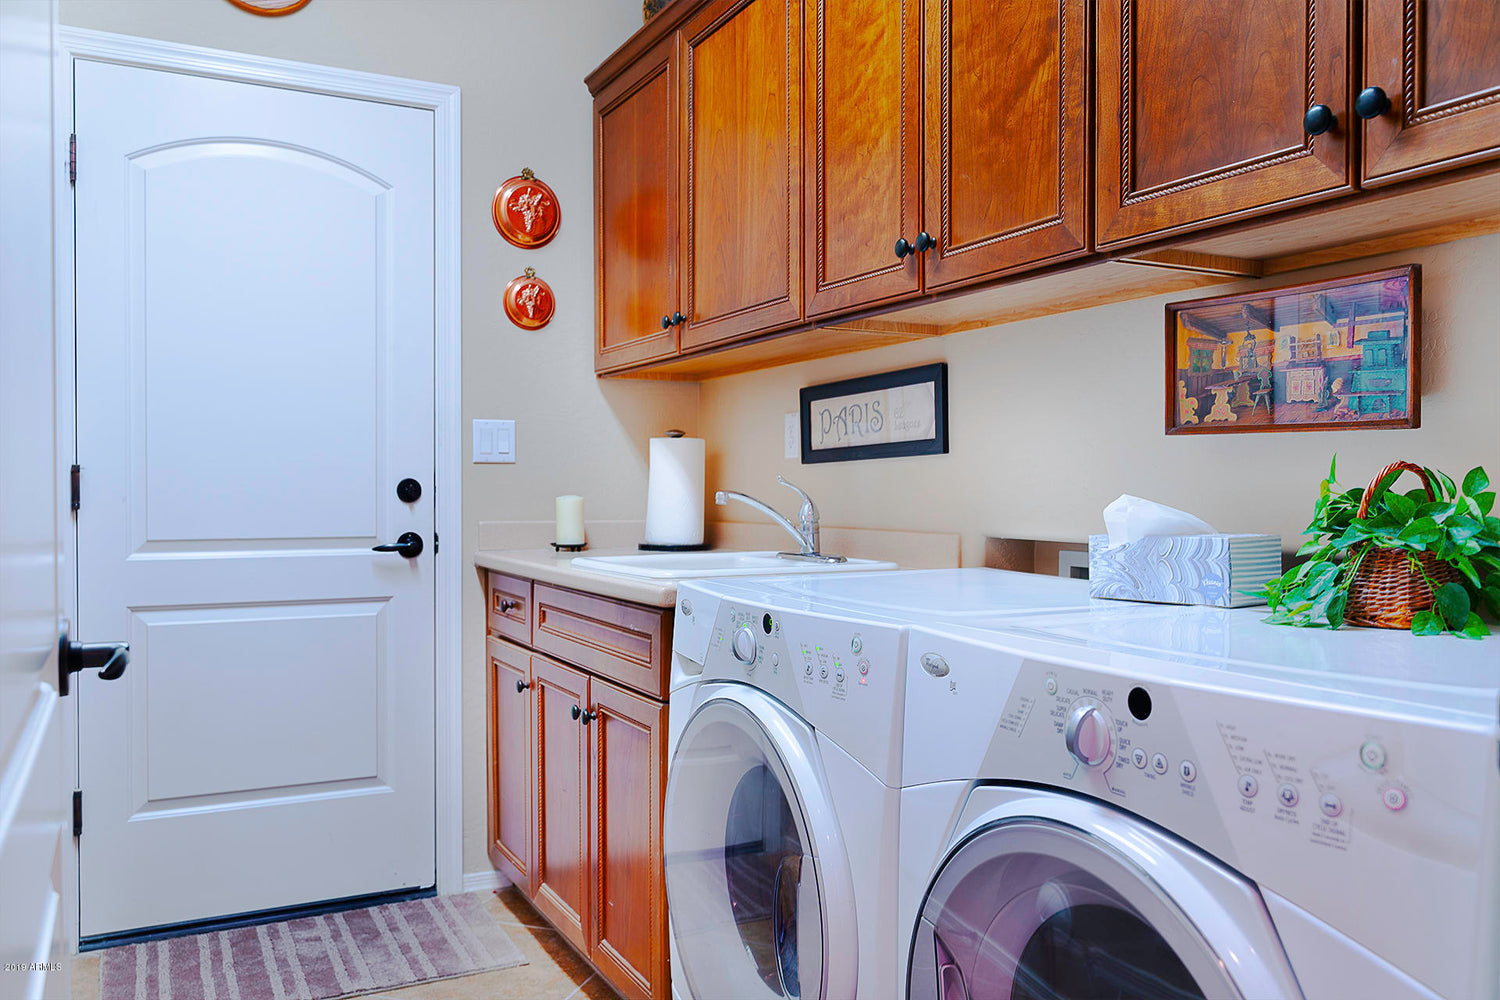 How to plan a laundry room